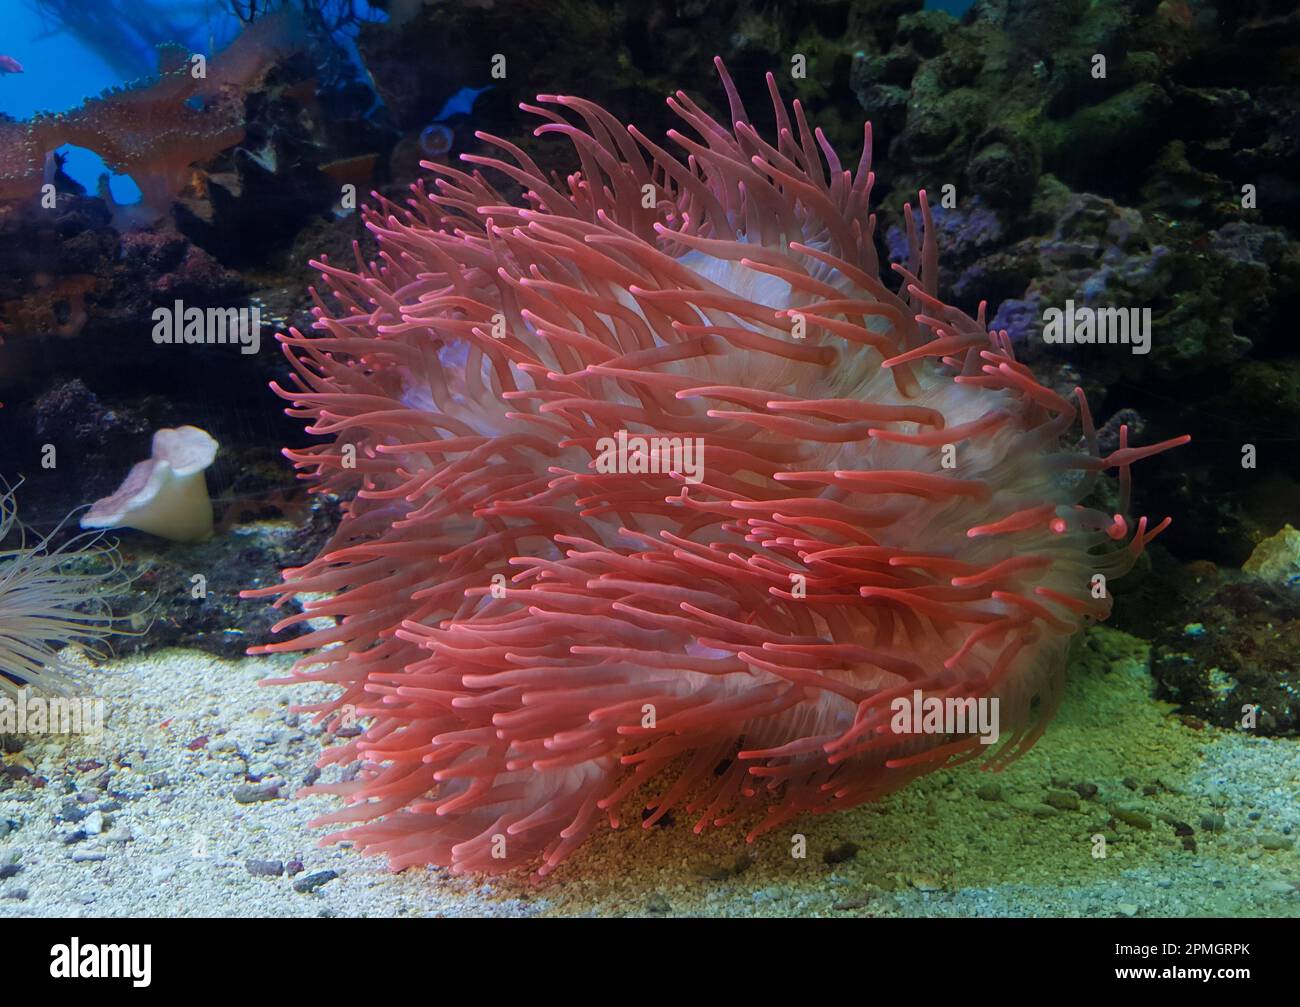 underwater image of an Actiniaria - Sea Anemone, coral Stock Photo